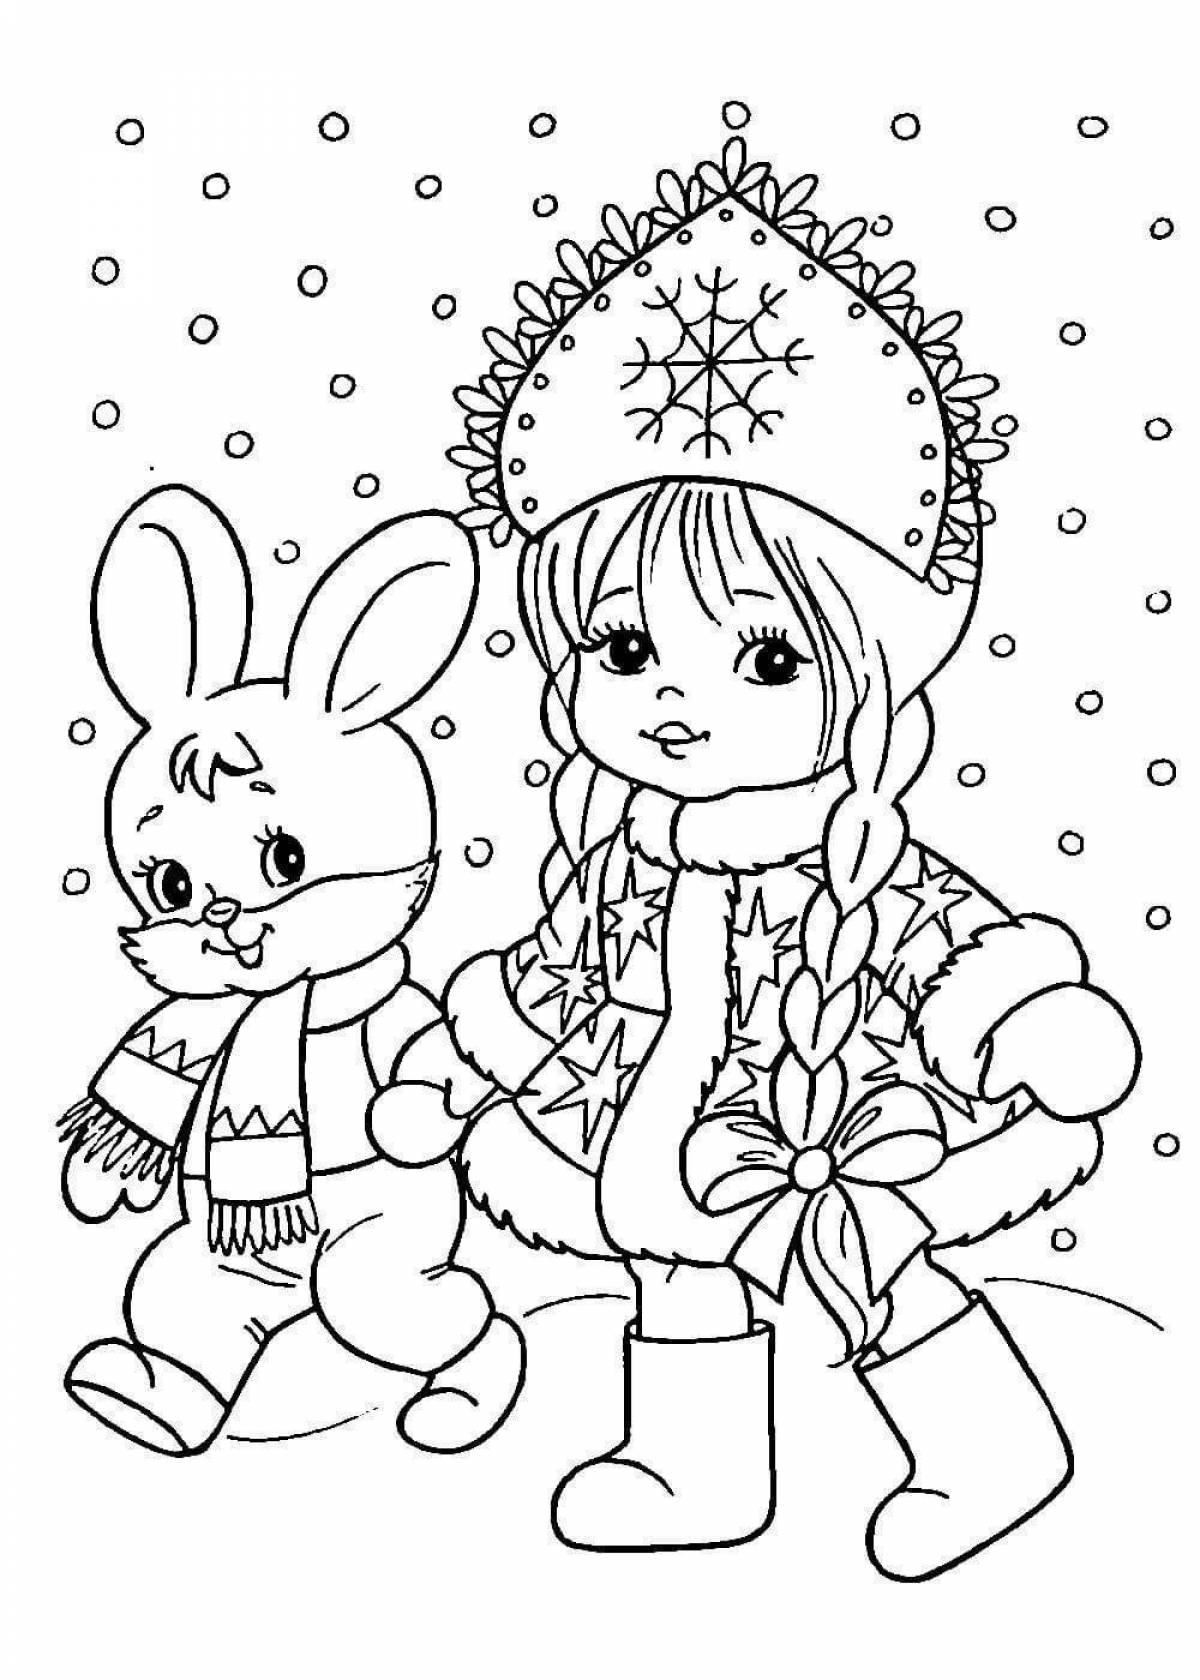 Glitter Christmas drawing for kids